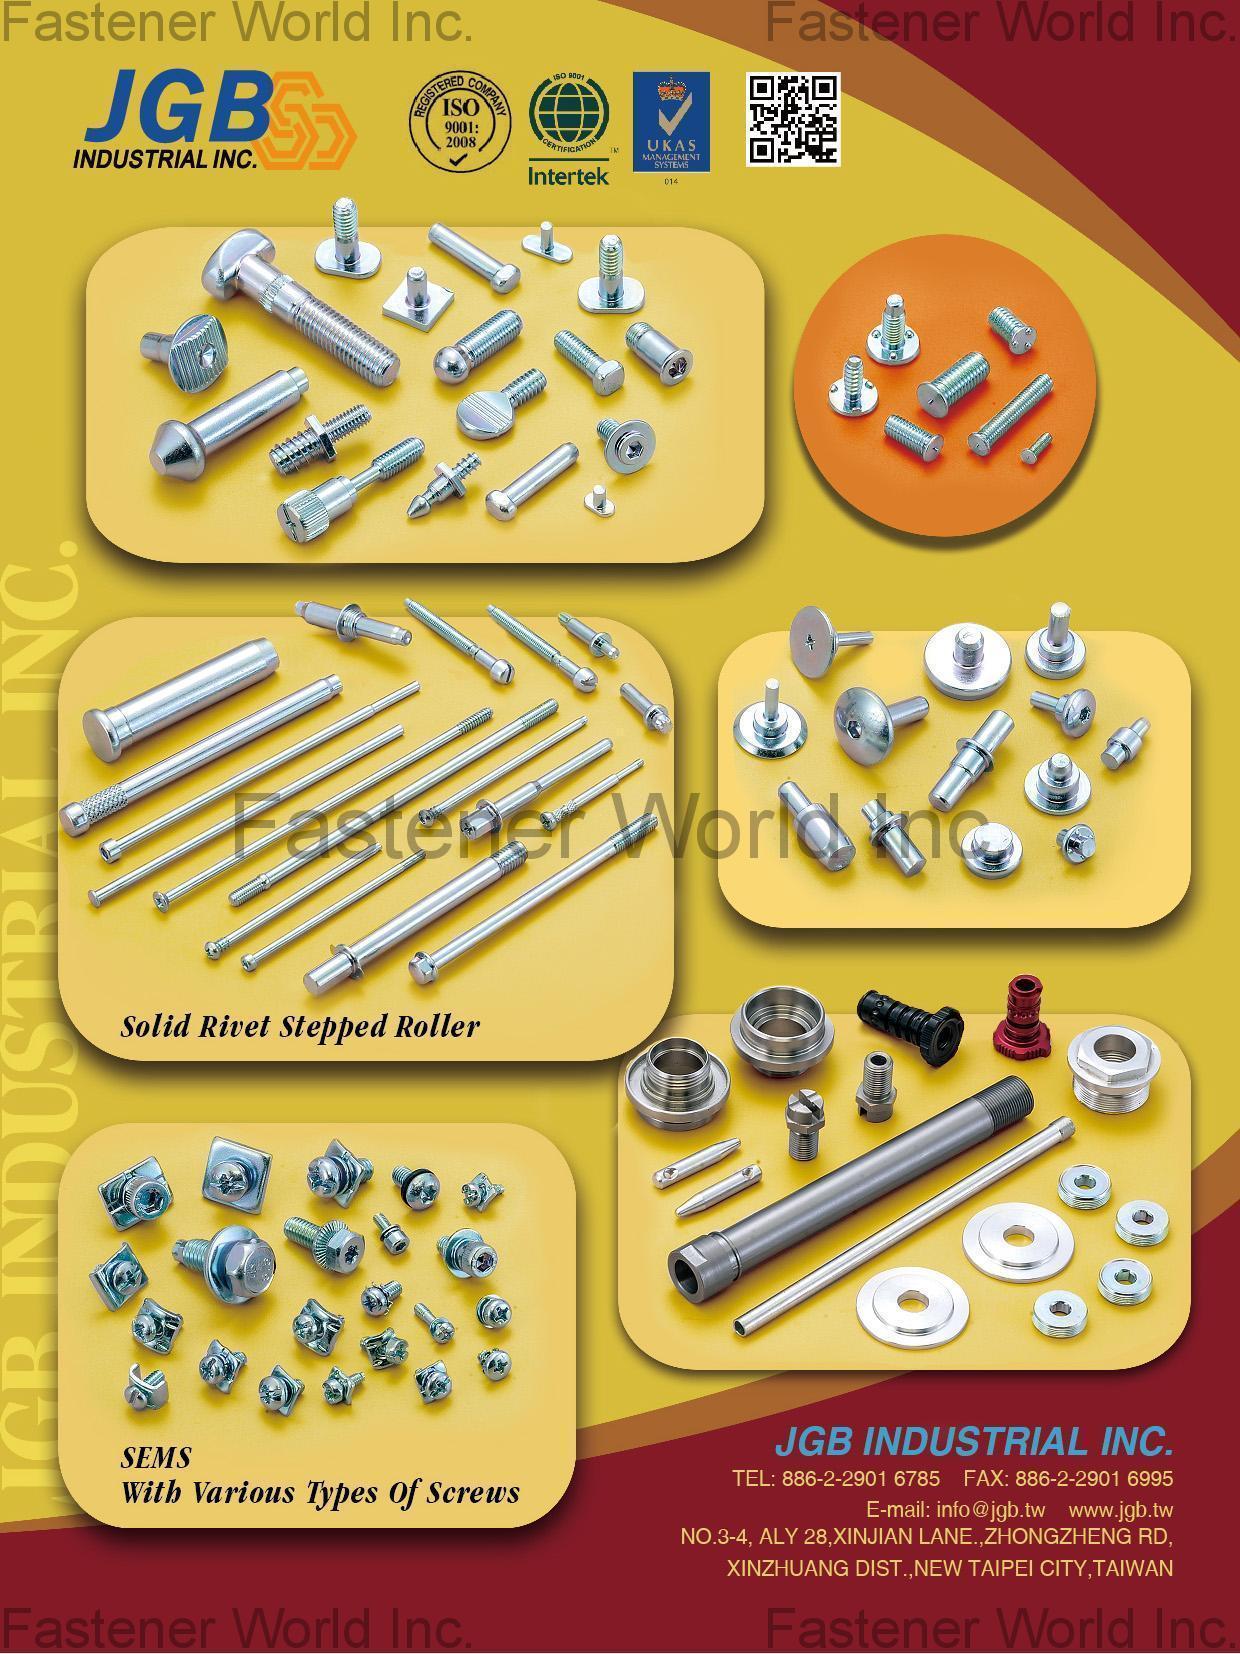 SEMS Screws,Precision Metal Parts,Dowel Pins,Thumb Nuts,Turning Parts,Milled Nuts,Shoulder Screws,Thumb Screws,Brass Insert,Milled Bolts,Special Cold / Hot Forming Parts